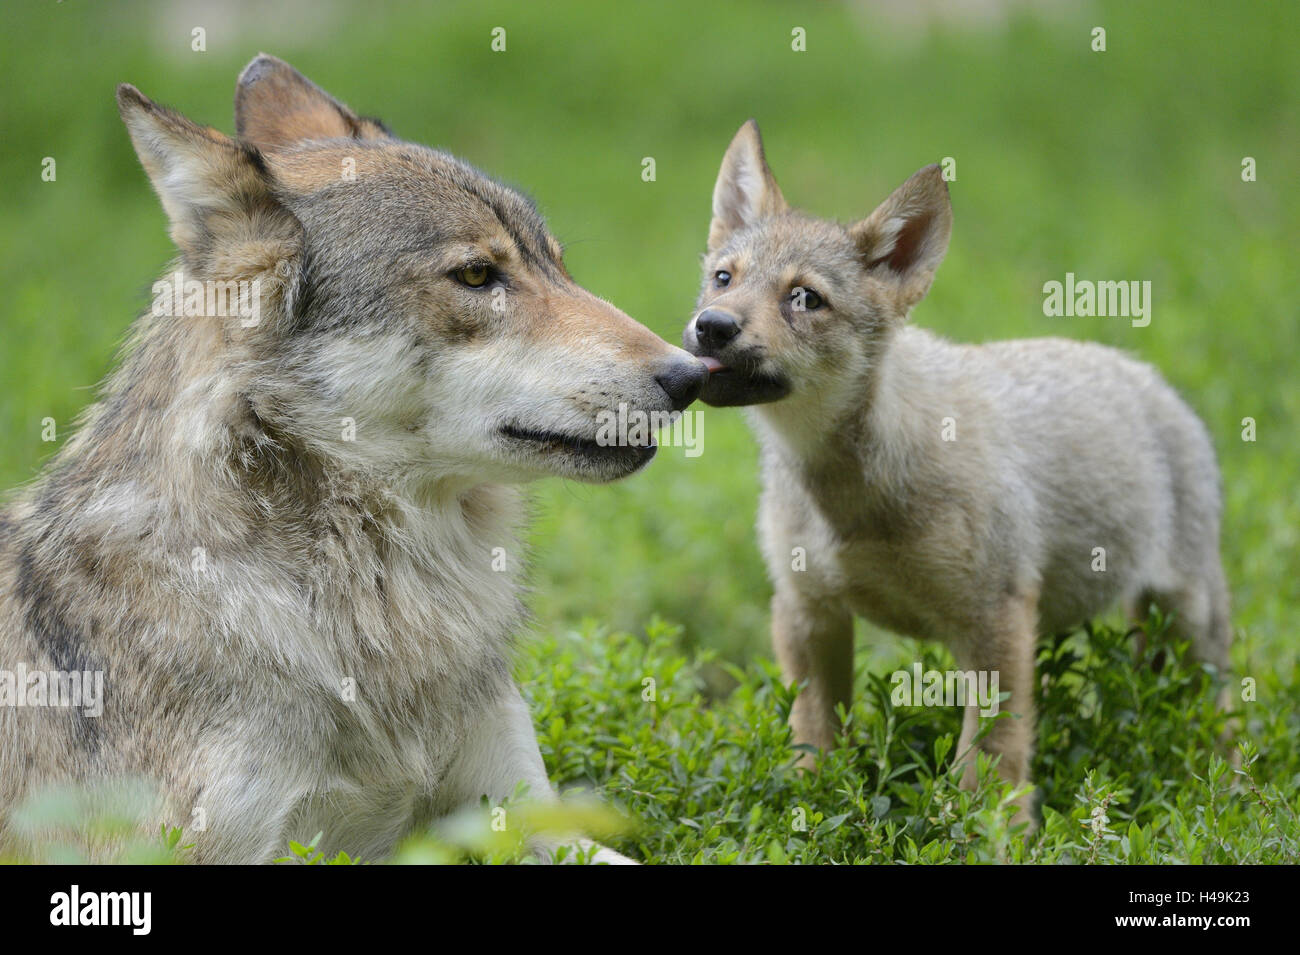 Eastern timber wolves, Canis lupus lycaon, young animal, looking at camera, Stock Photo